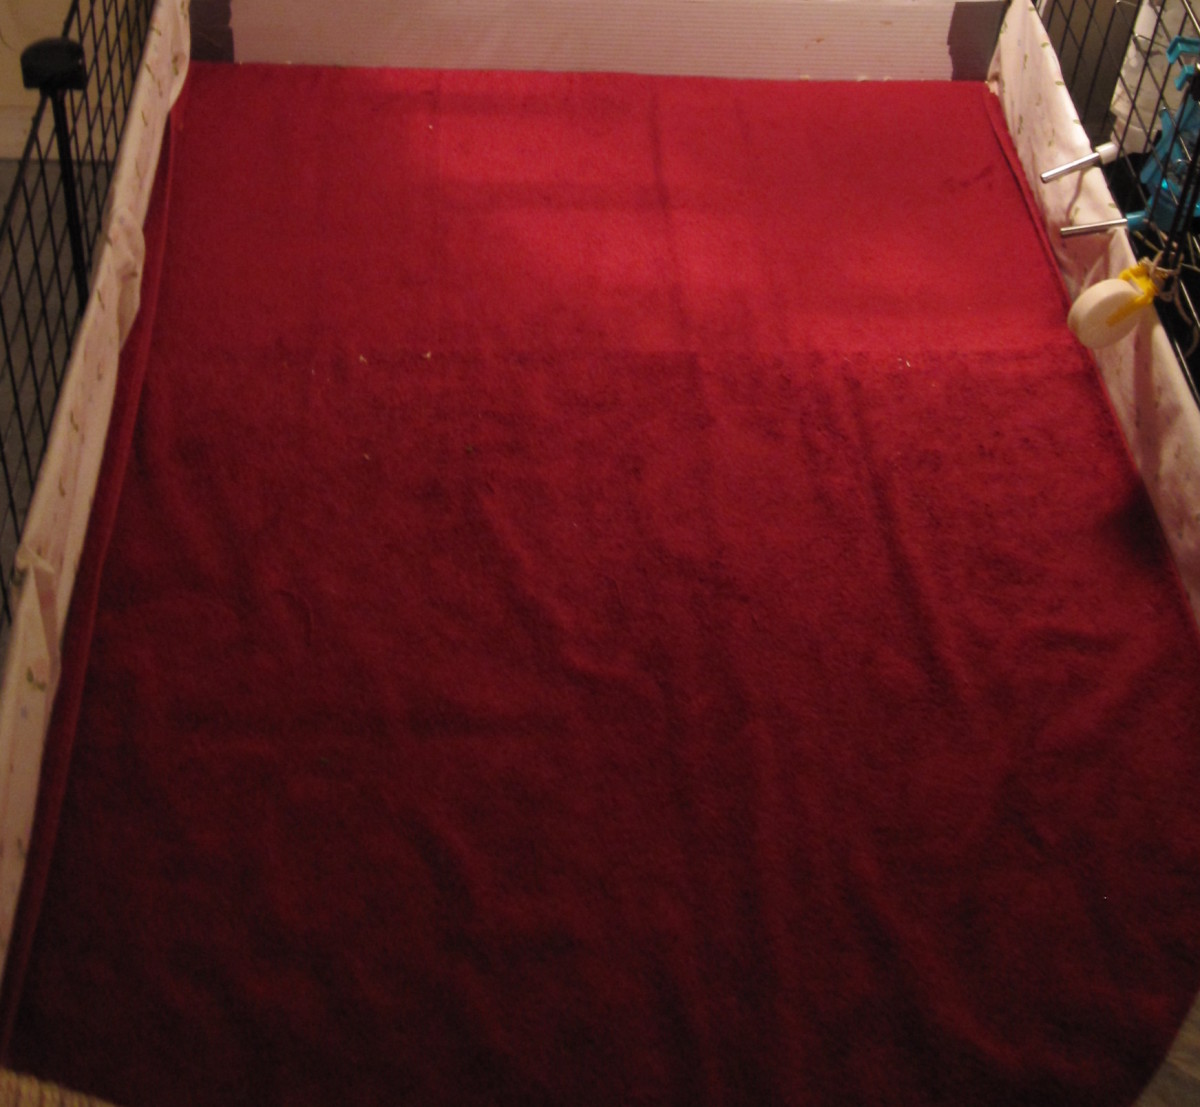 Their little red carpet. It will be changed today, so I will dust it off instead of using the lint roller to clean their fur off of the towel.